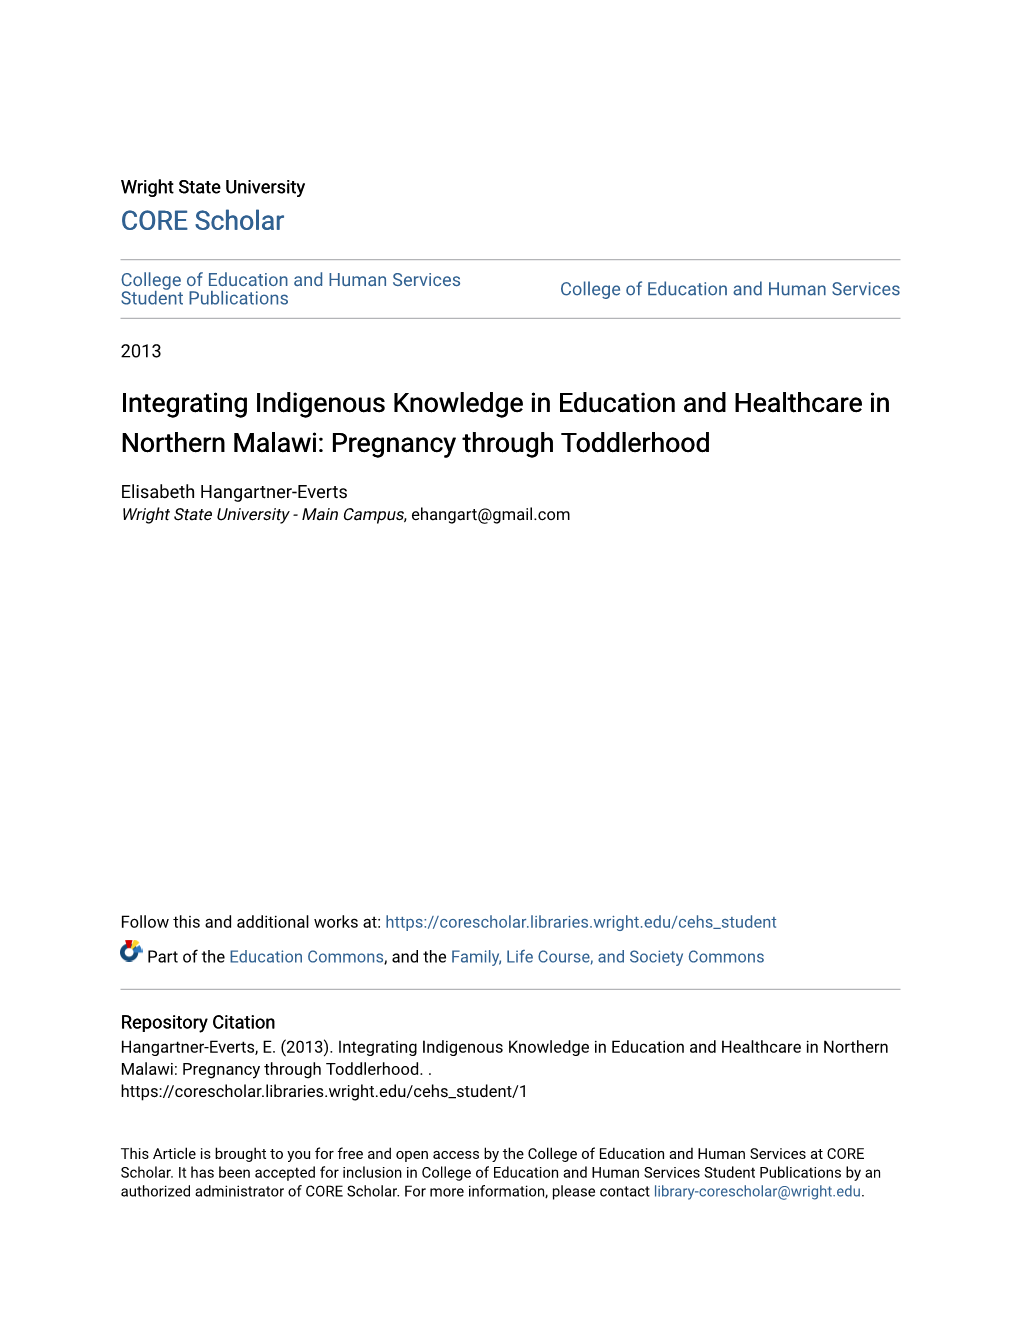 Integrating Indigenous Knowledge in Education and Healthcare in Northern Malawi: Pregnancy Through Toddlerhood